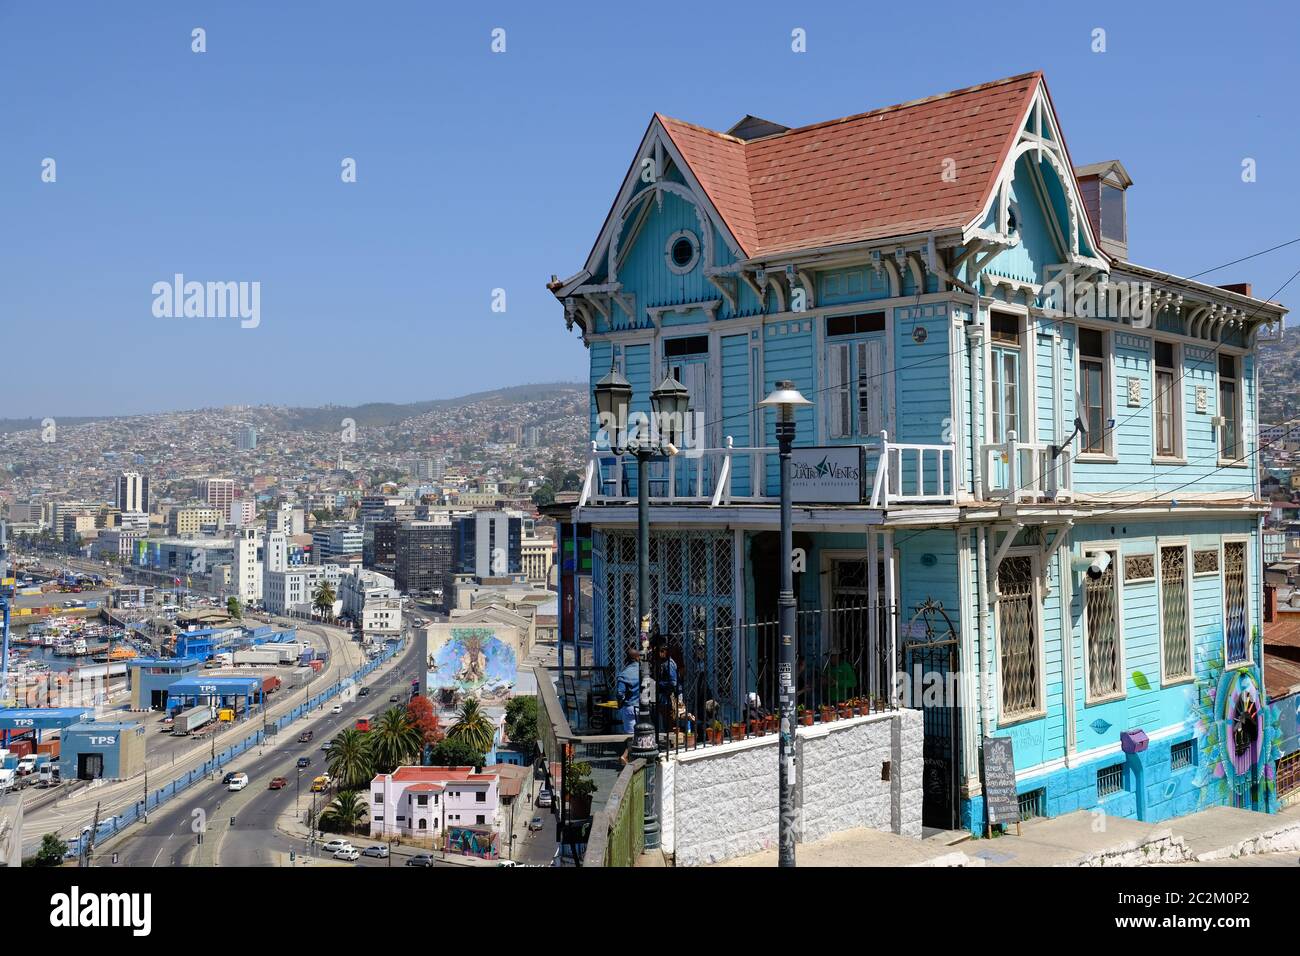 Chile Valparaiso - Viewpoint Paseo 21 de Mayo with colorful clifftop house Stock Photo